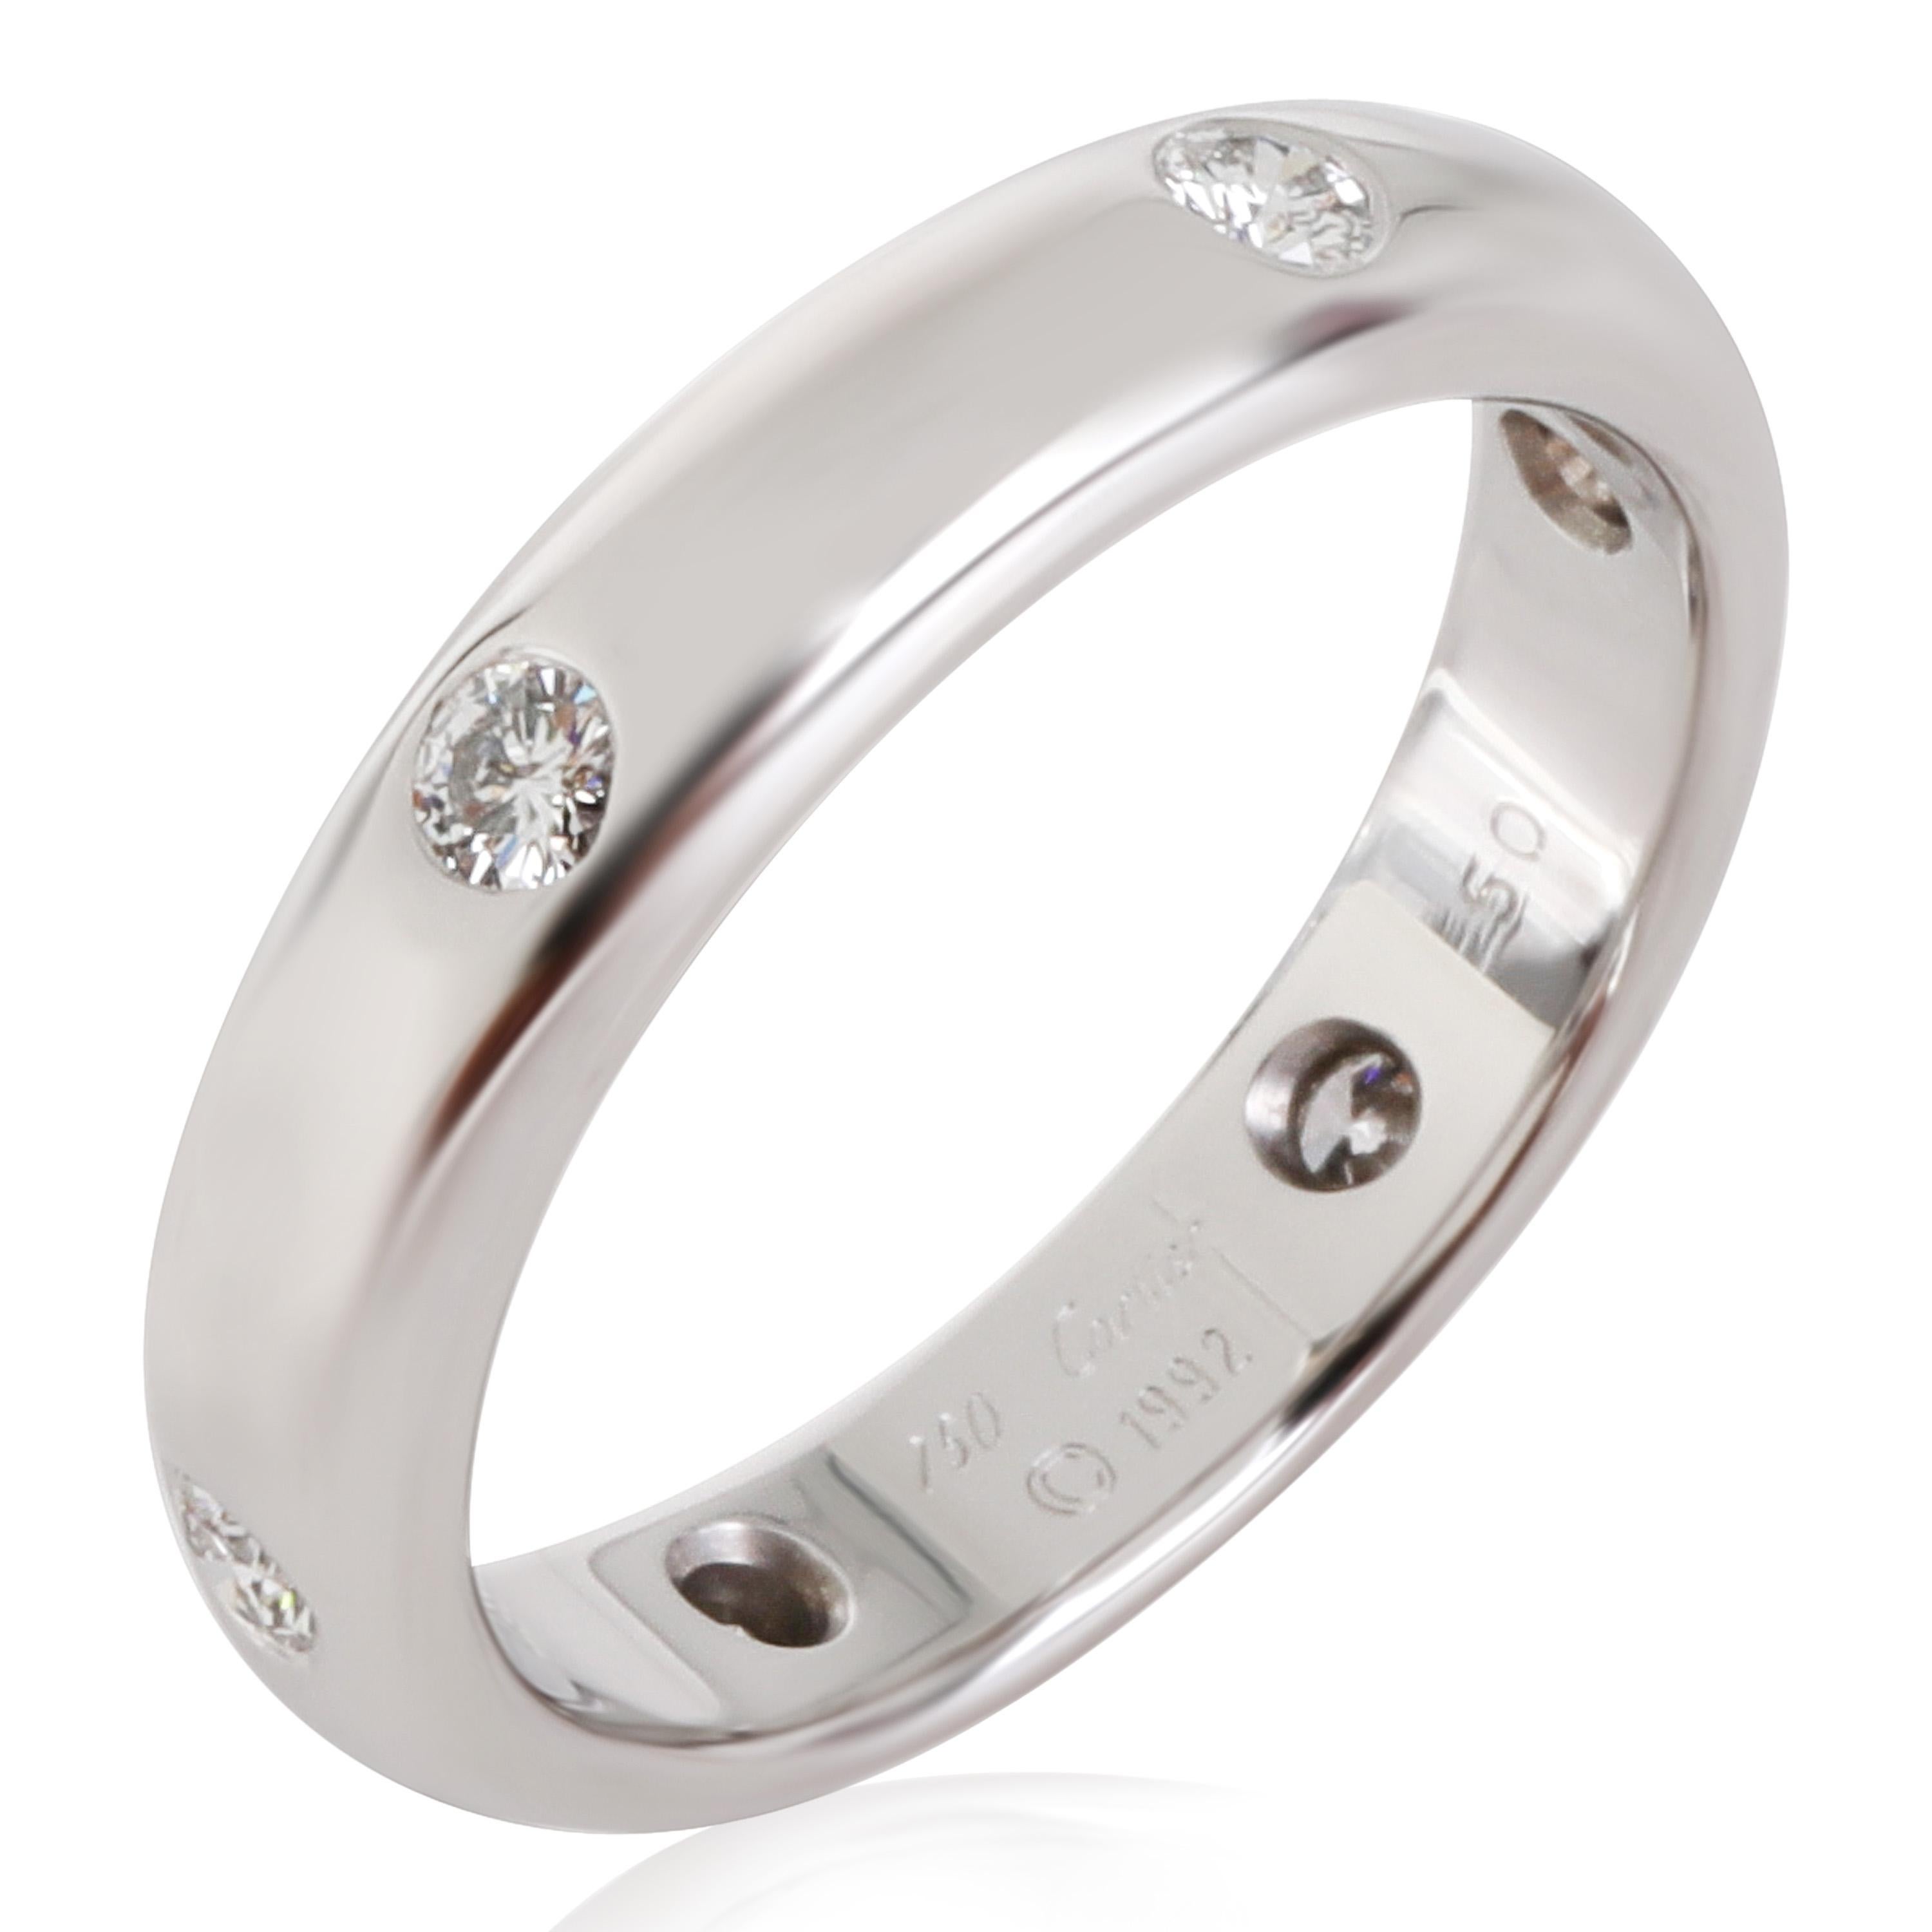 Cartier Stella Diamond Band in 18k White Gold 0.25 CTW

PRIMARY DETAILS
SKU: 118866
Listing Title: Cartier Stella Diamond Band in 18k White Gold 0.25 CTW
Condition Description: Retails for 2495 USD. In excellent condition and recently polished. Ring